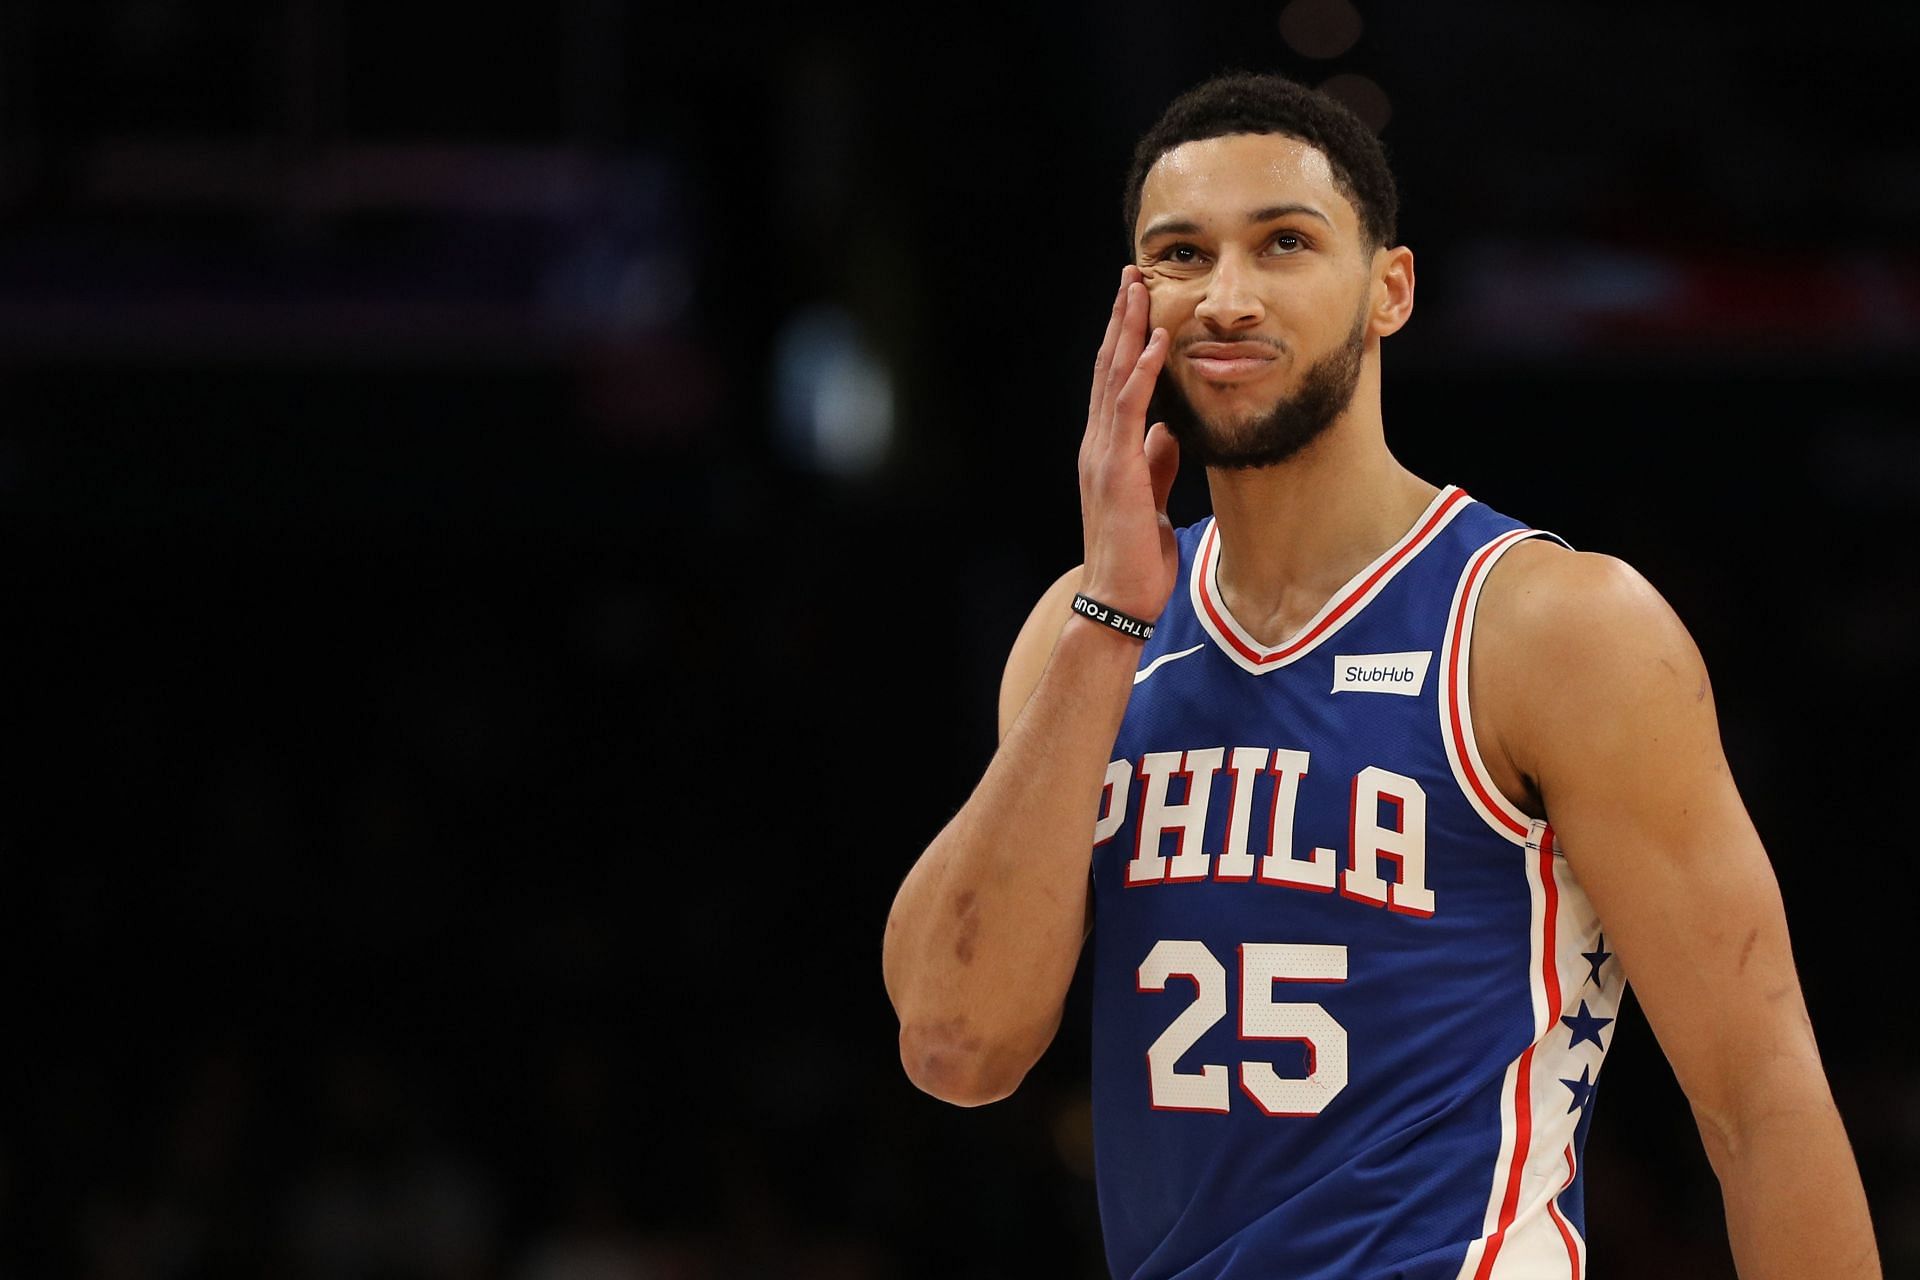 Philadelphia 76ers disgruntled star Ben Simmons continues to wait for a trade